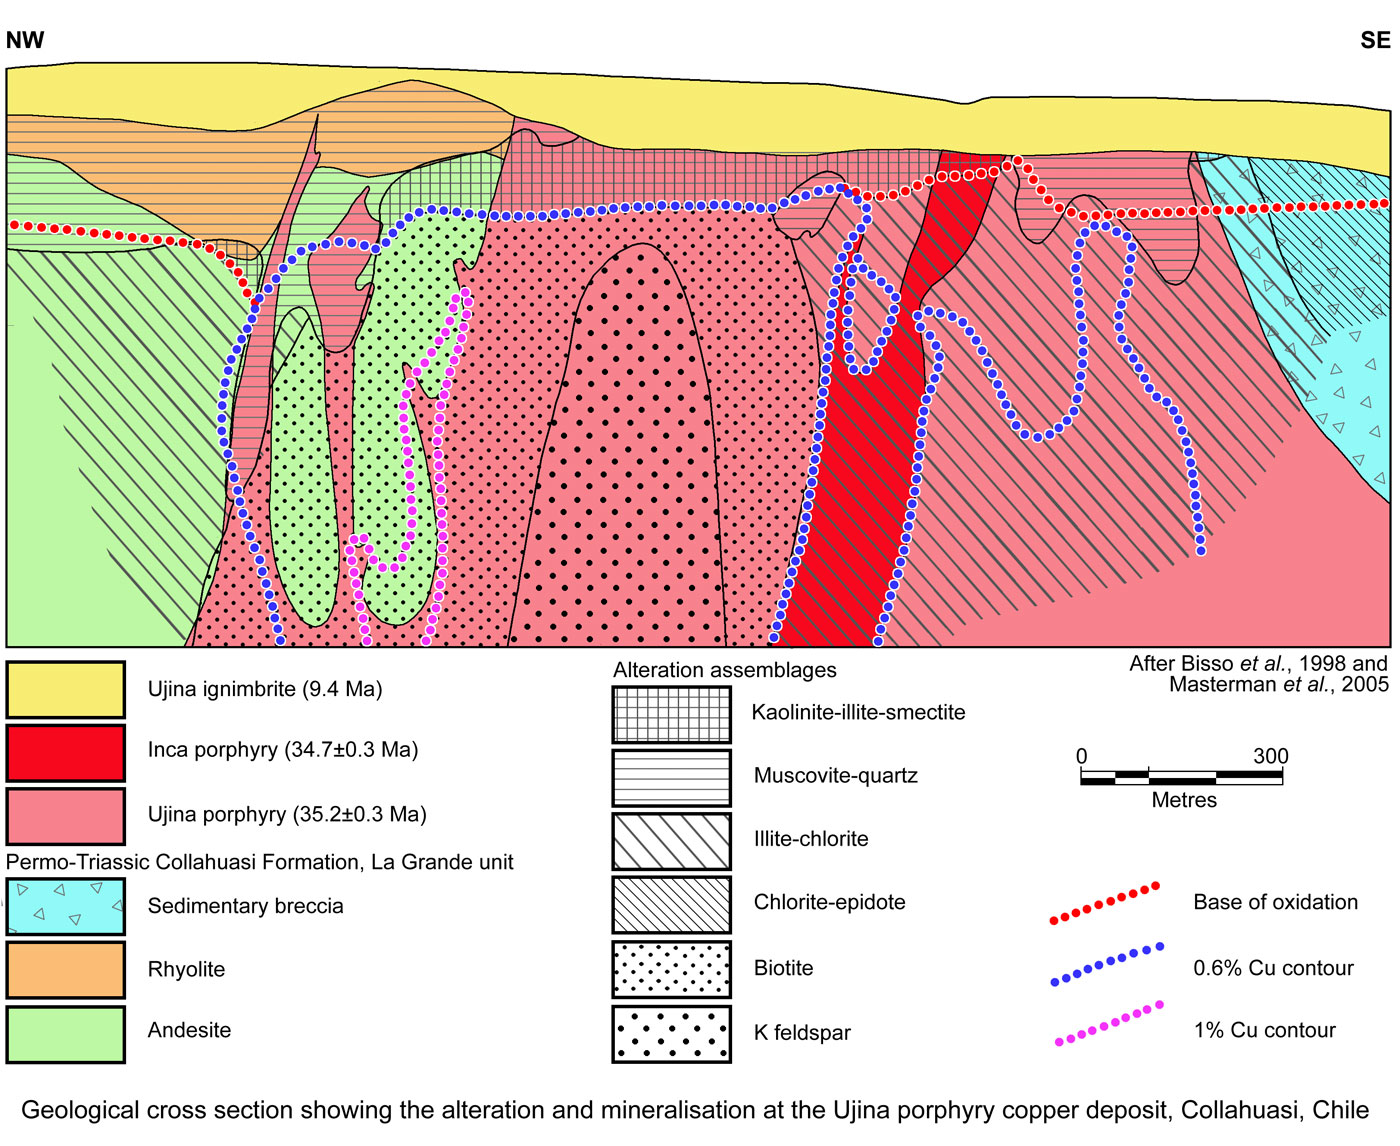 Ujina geology and alteration